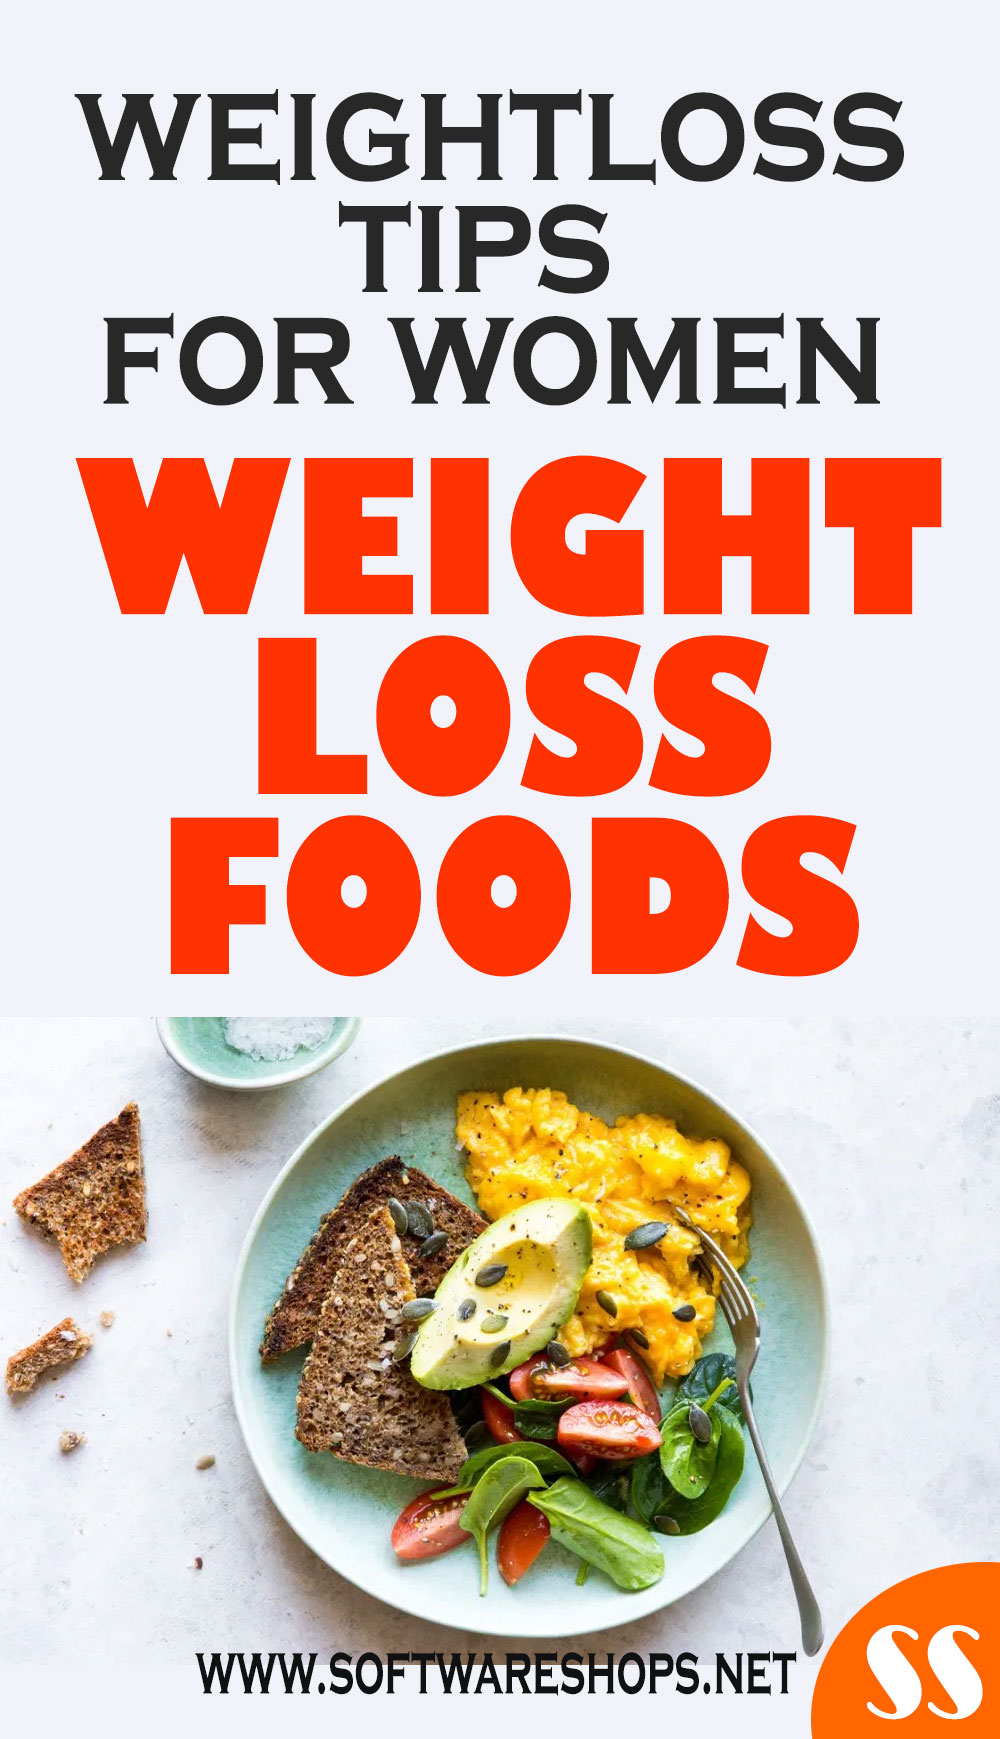 weightloss foods and tips